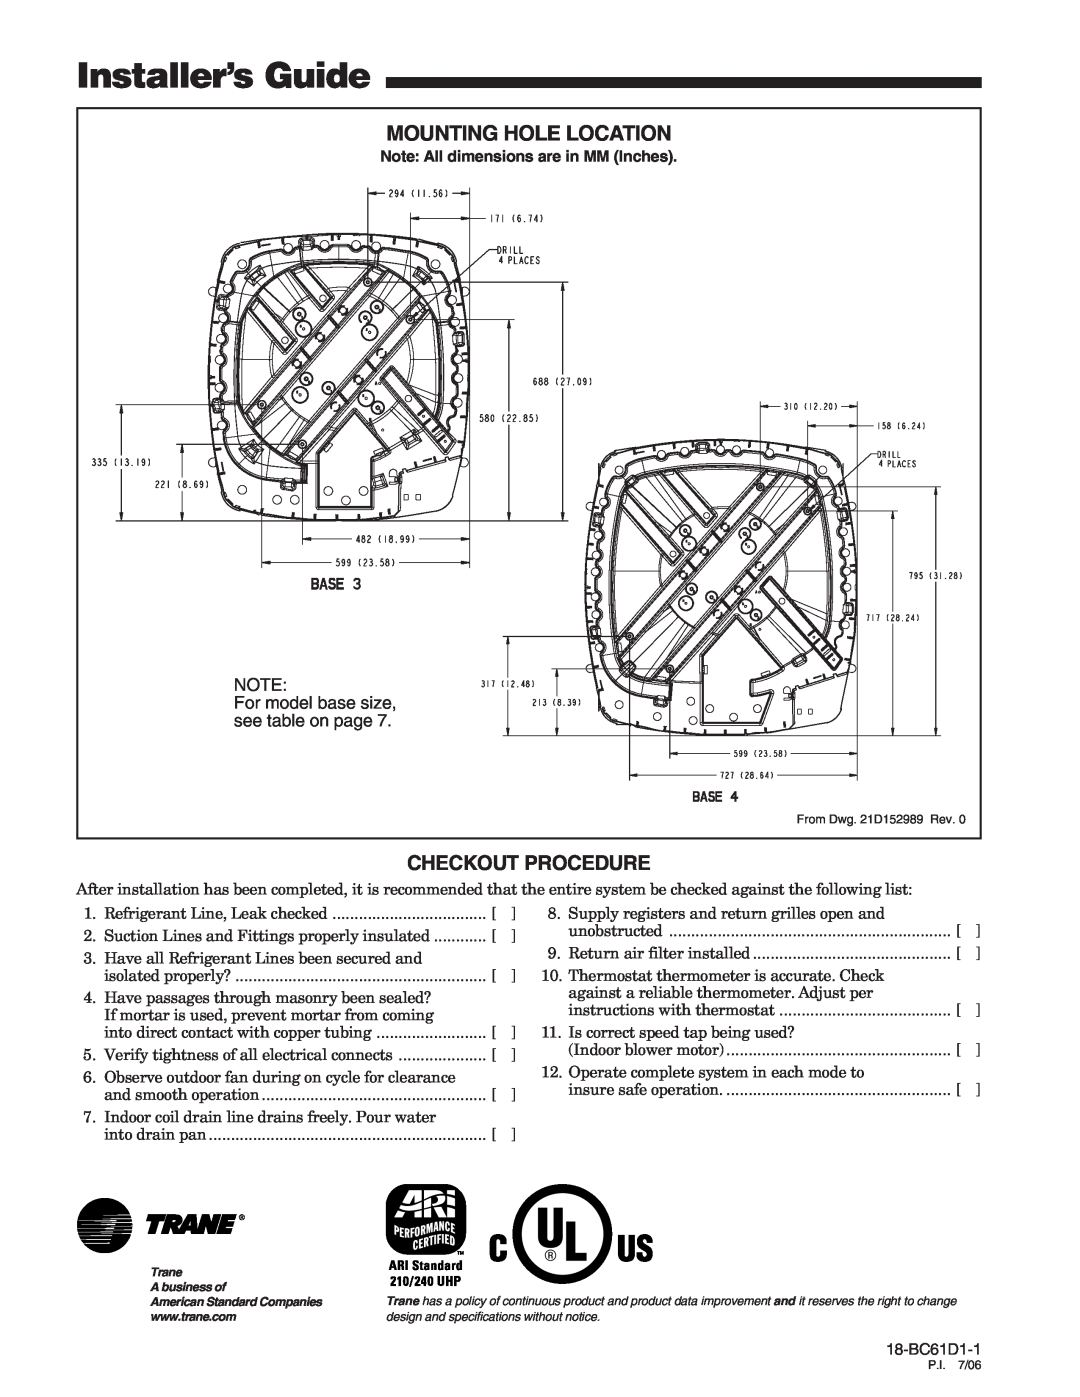 Trane 4TWB3 manual Installer’s Guide, Mounting Hole Location, Checkout Procedure, Note All dimensions are in MM Inches 